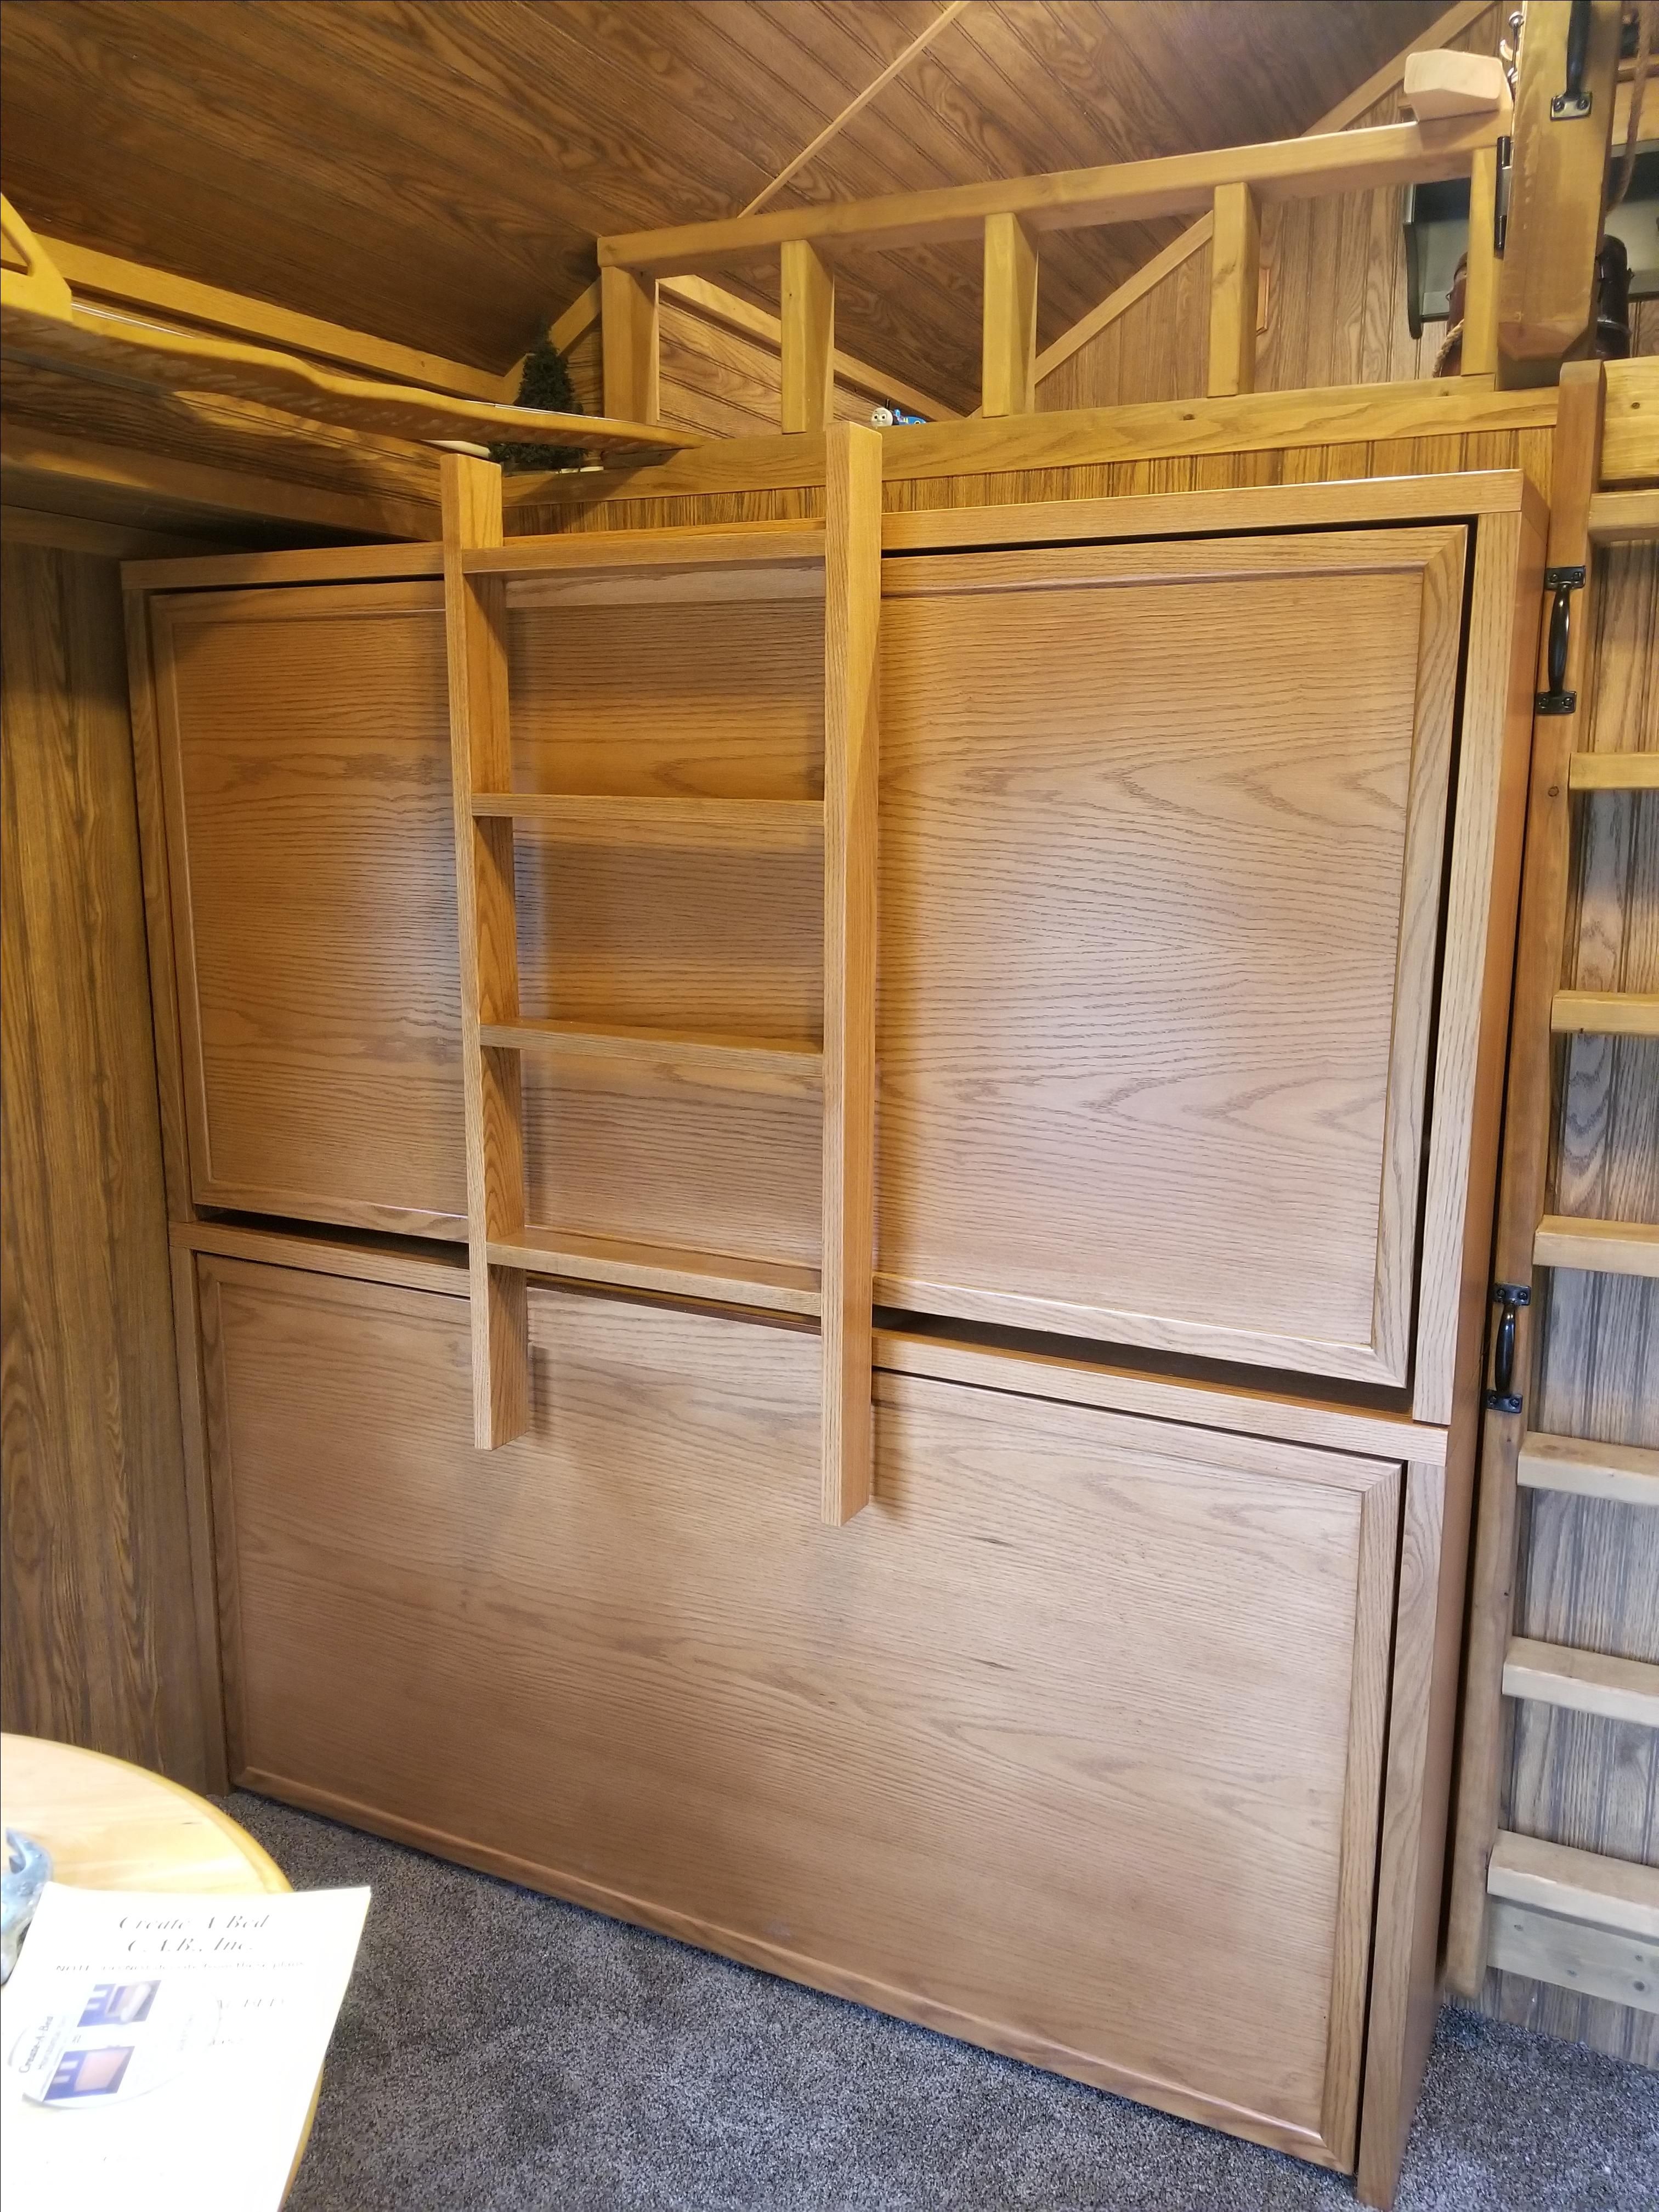 Murphy Bunk Beds By Kirk Kreations, How To Build A Twin Bunk Murphy Bed